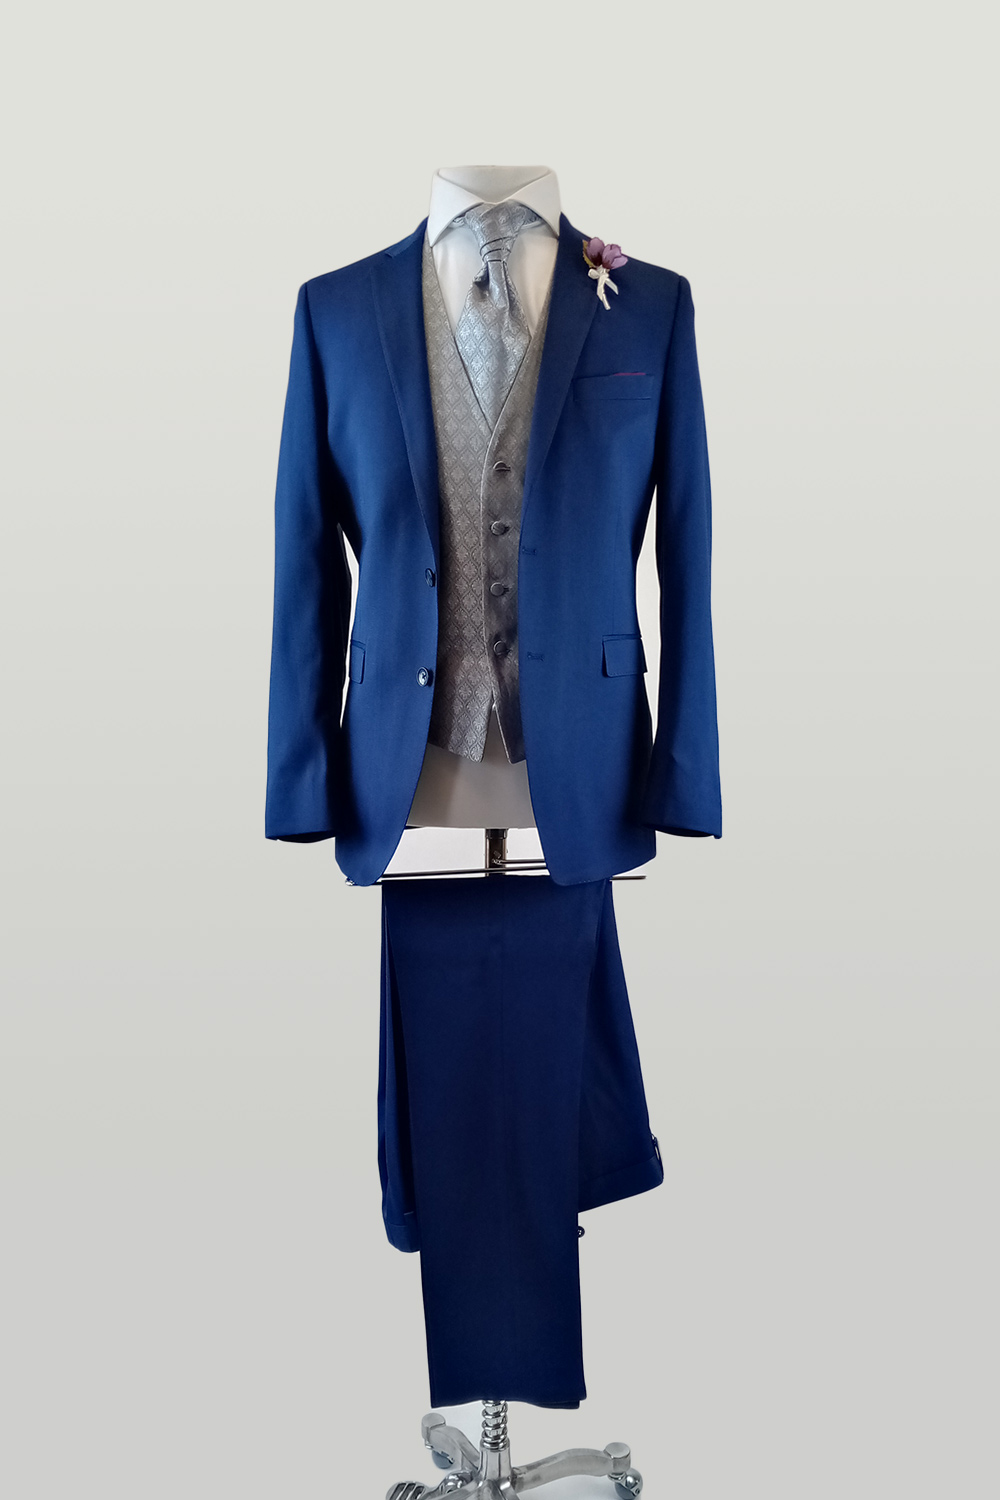 Azure Electric with Diamanté Waistcoat - Tom Murphy's Formal and Menswear